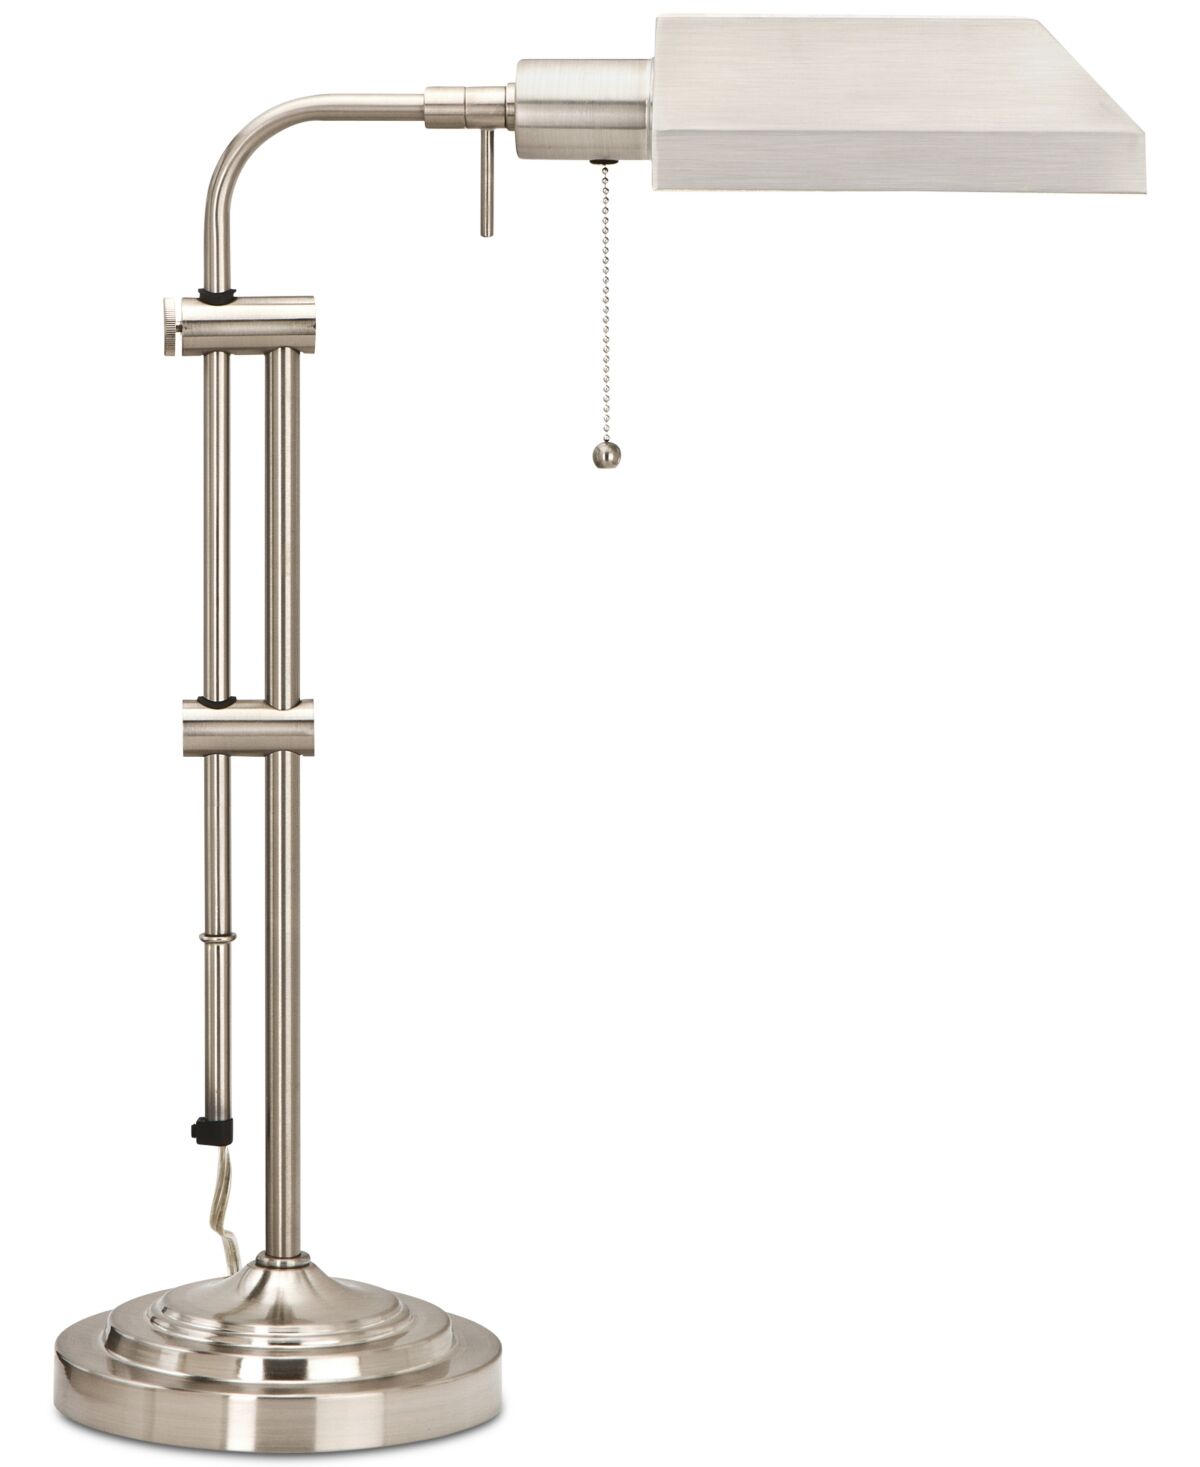 Cal Lighting Pharmacy Table Lamp with Adjustable Pole - Brushed Steel